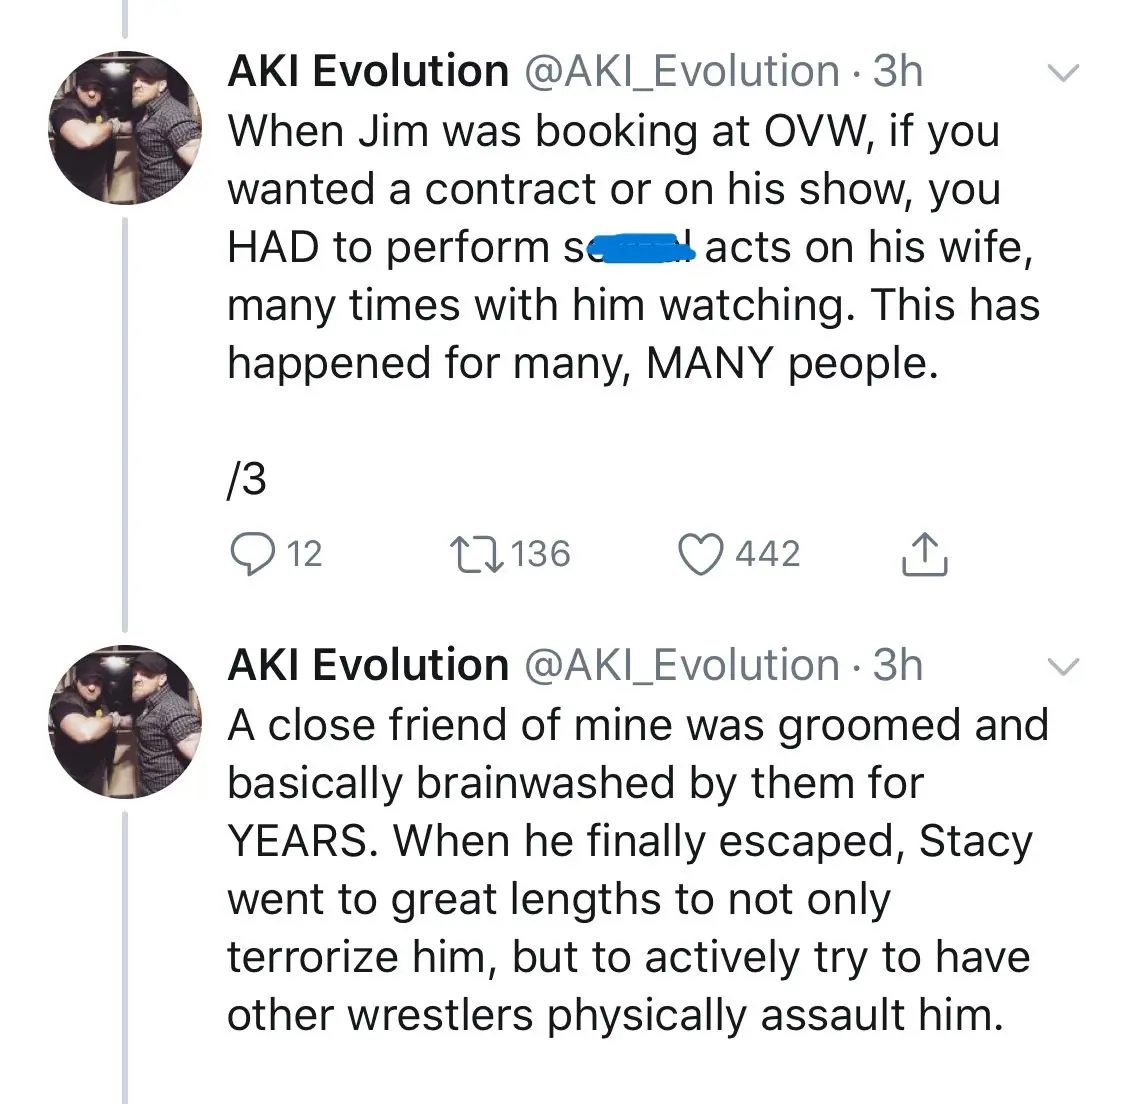 Aki Evolution made a tweet accusing Jim and his wife of grooming people while he was working with OVW